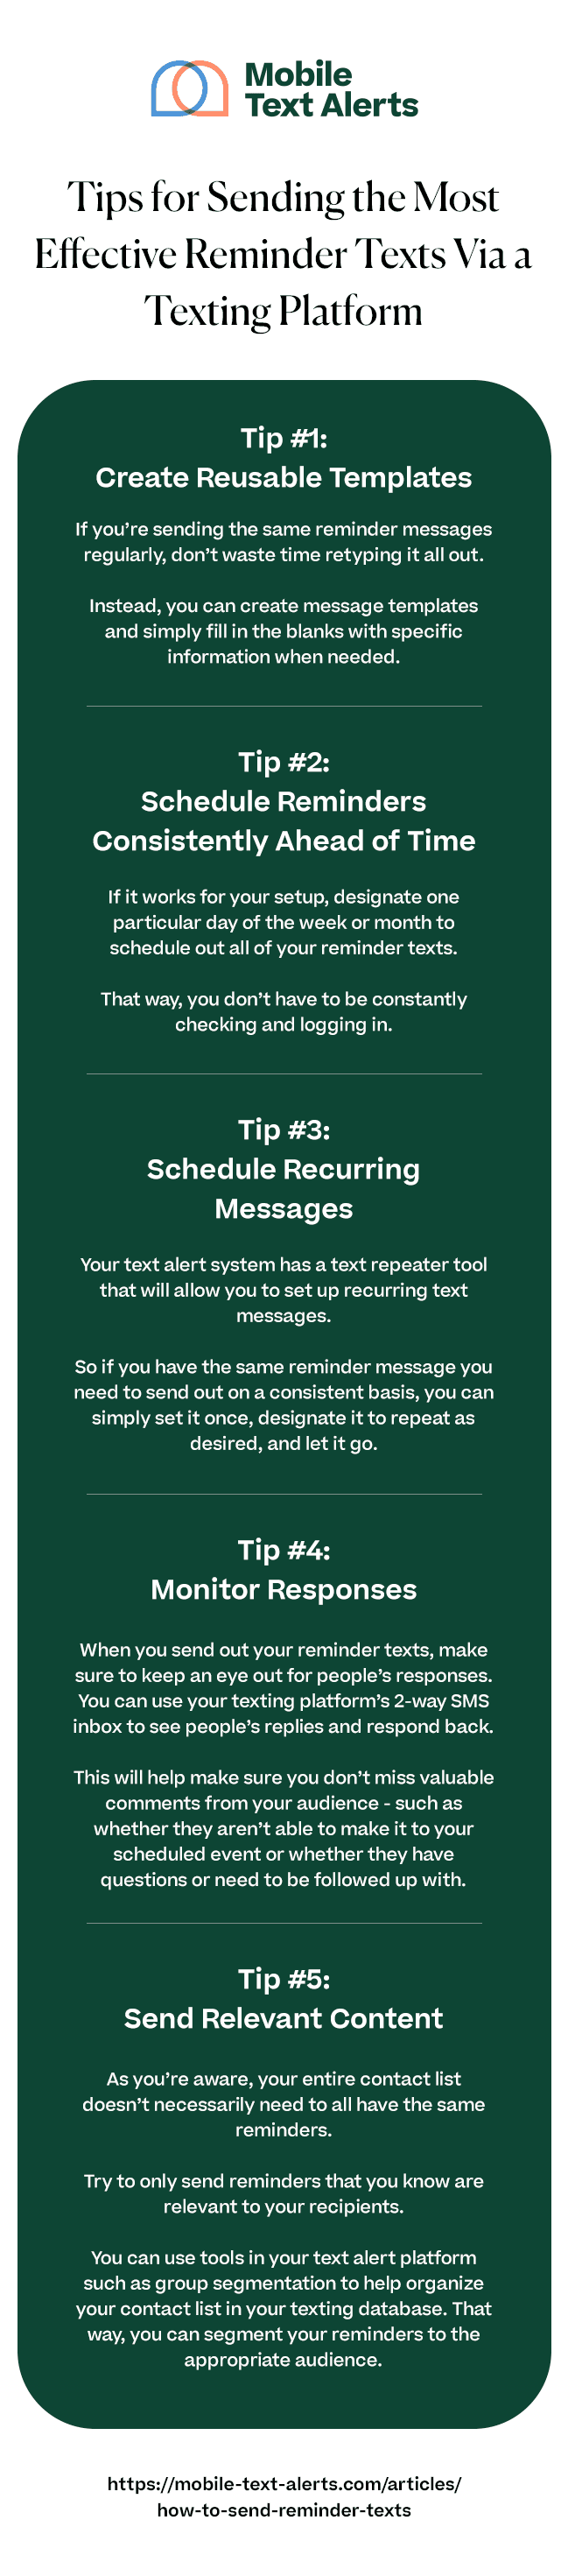 Tips for Sending the Most Effective Reminder Texts